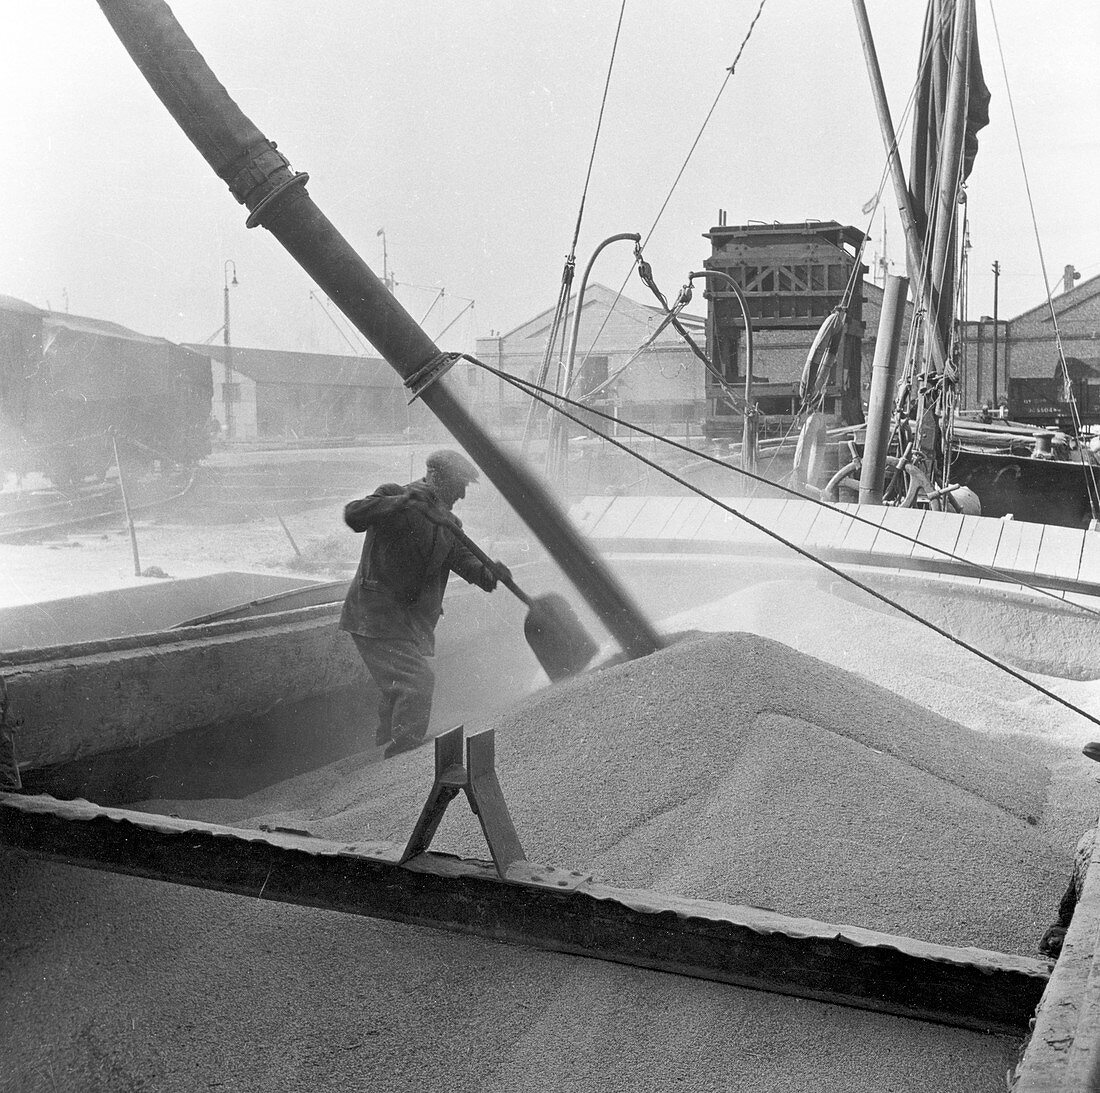 Pumping grain into barges, Millwall, London, 1953